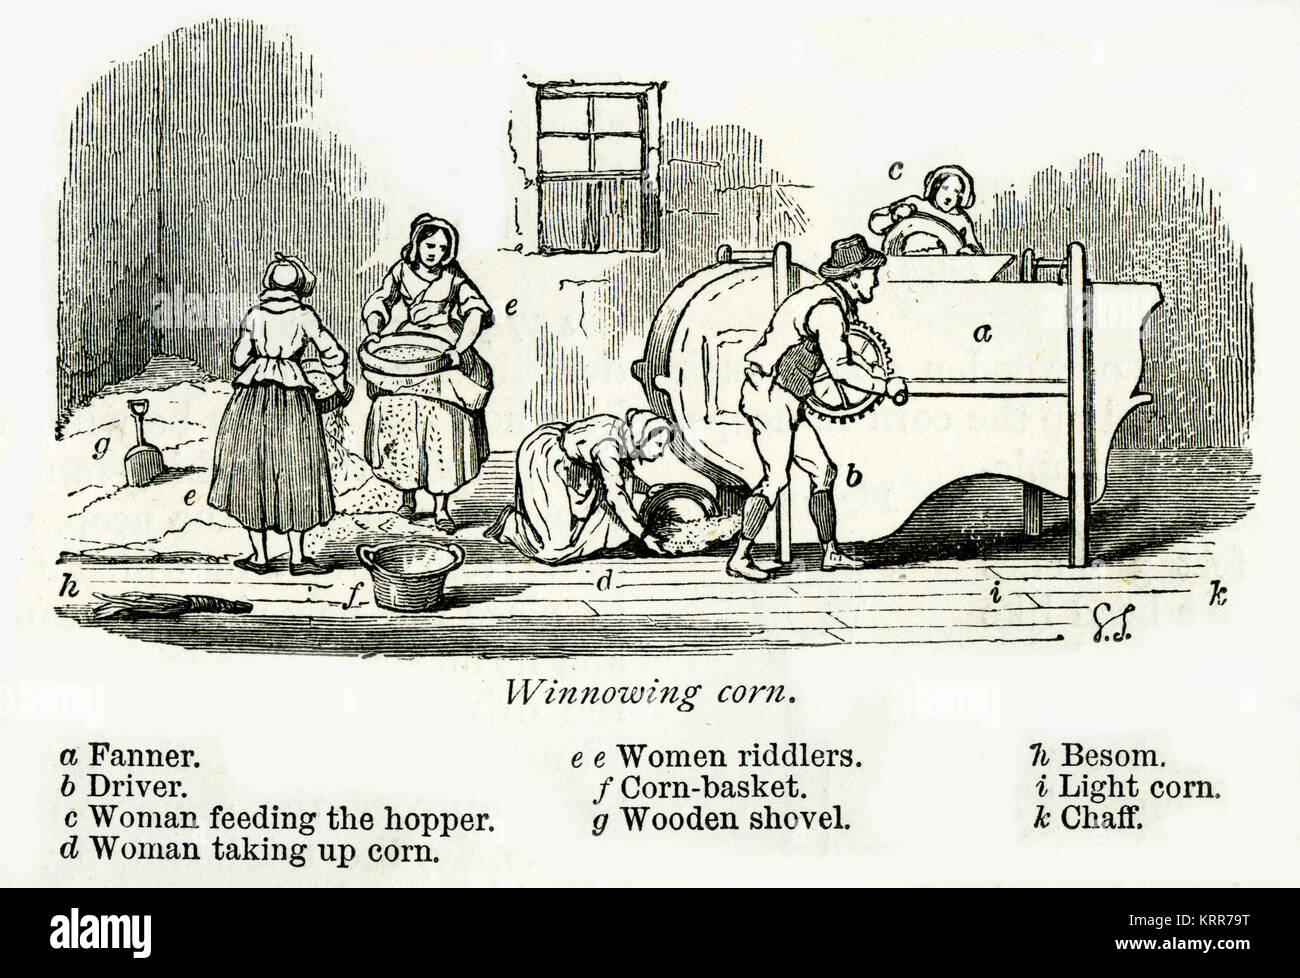 Engraving of women winnowing corn in England using riddlers and a hand-driven machine. From an engraving in The Book of the Farm by Henry Stephens 187 Stock Photo